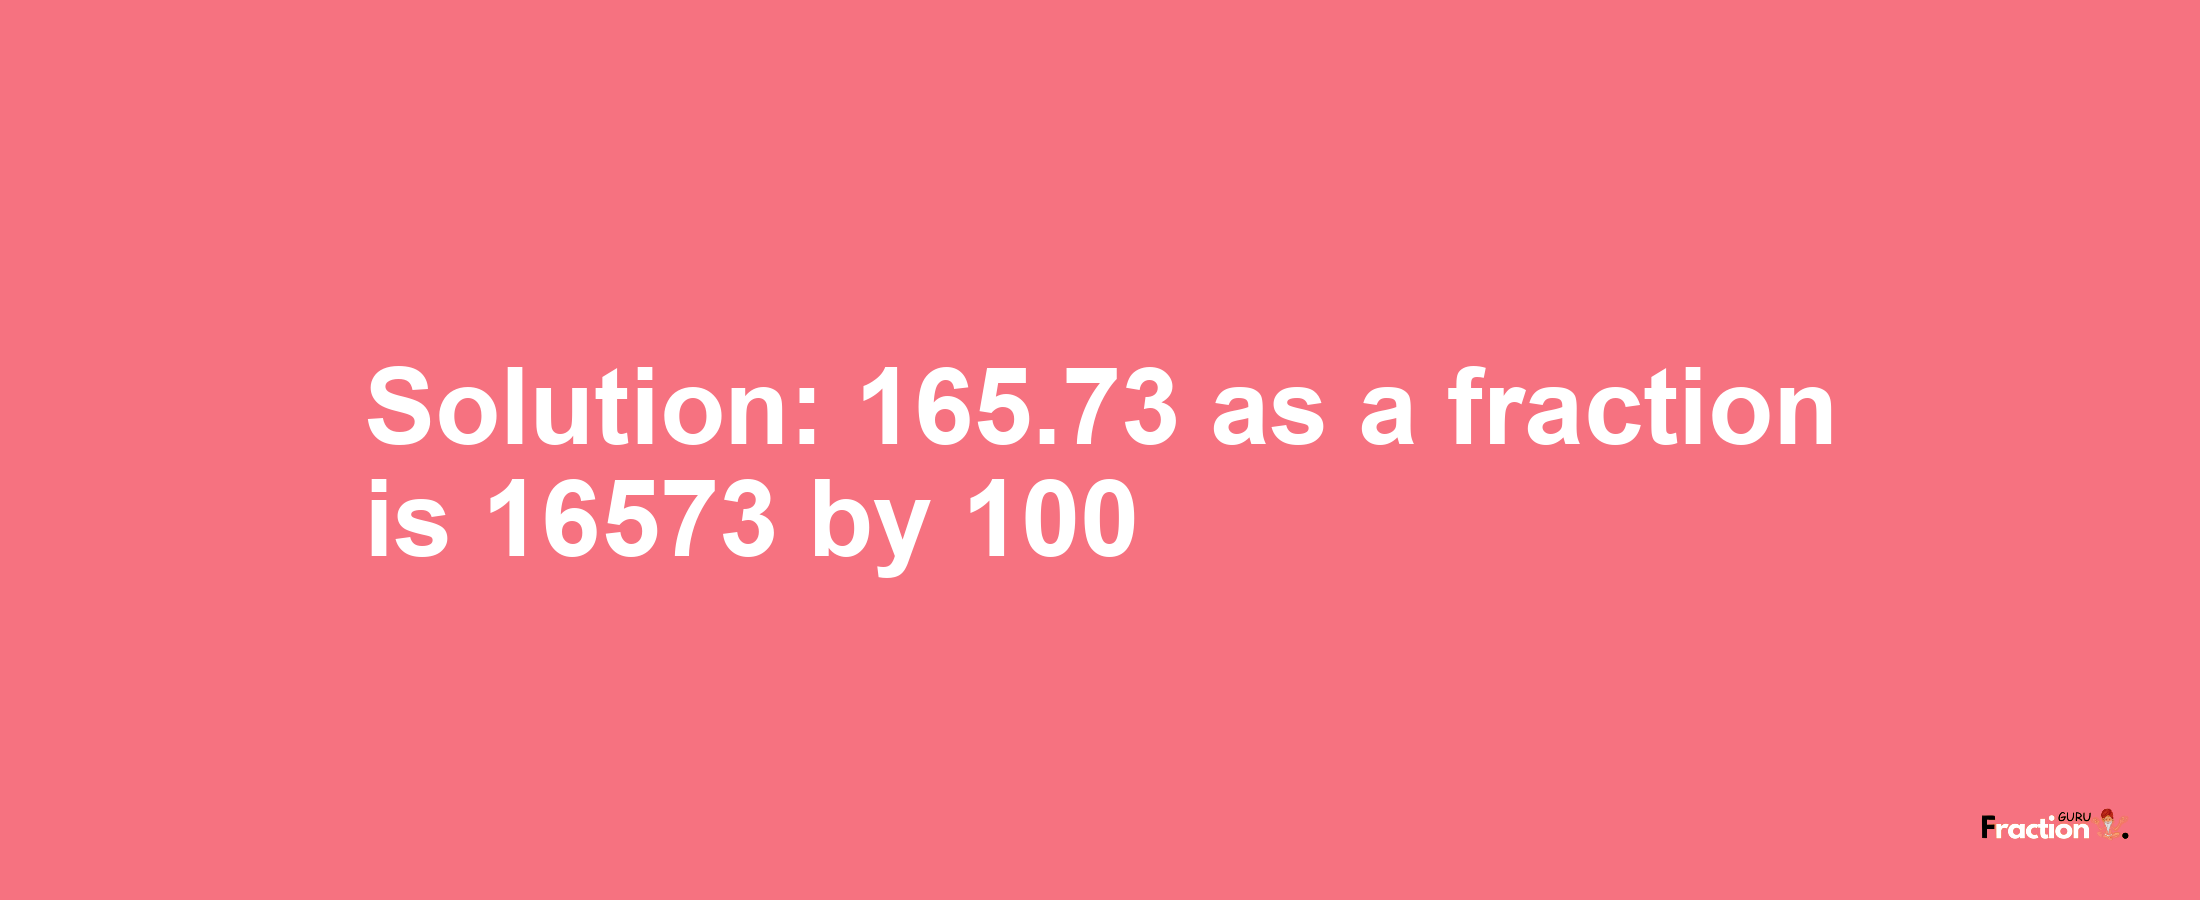 Solution:165.73 as a fraction is 16573/100